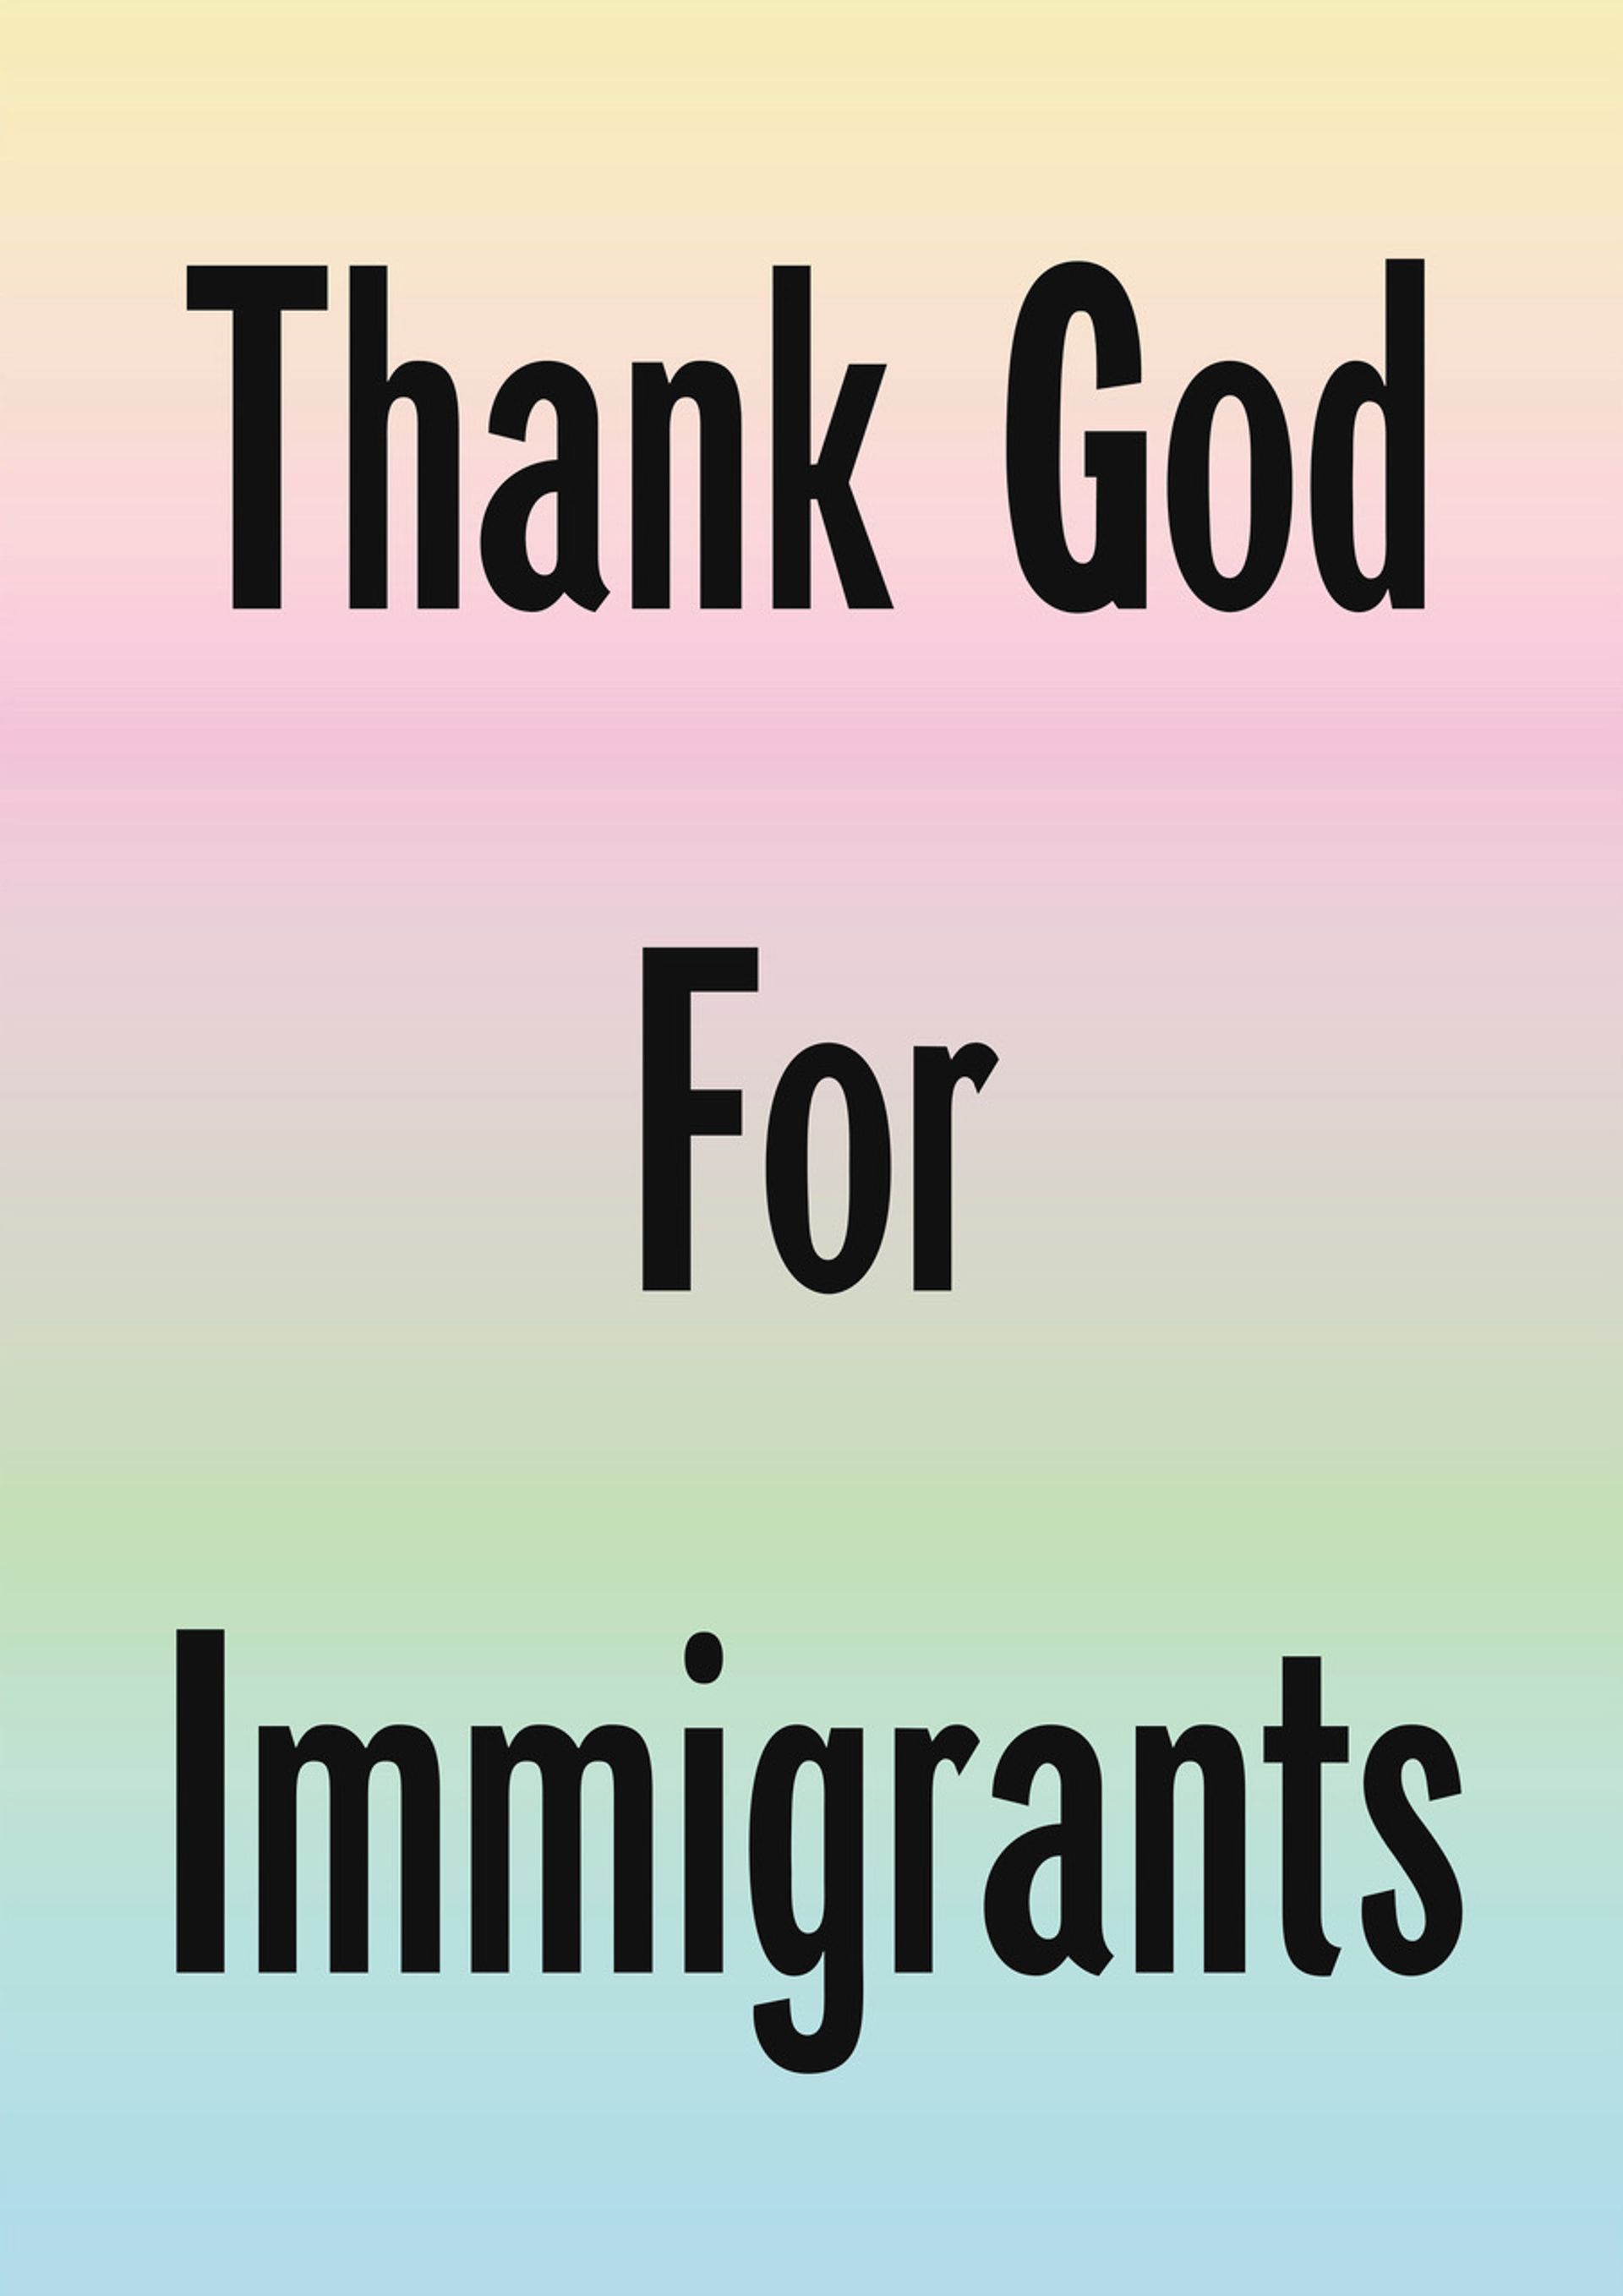 Proceeds from Jeremy Deller's Thank God For Immigrants will go to Refugee Action and The Trussel Trust © the artist